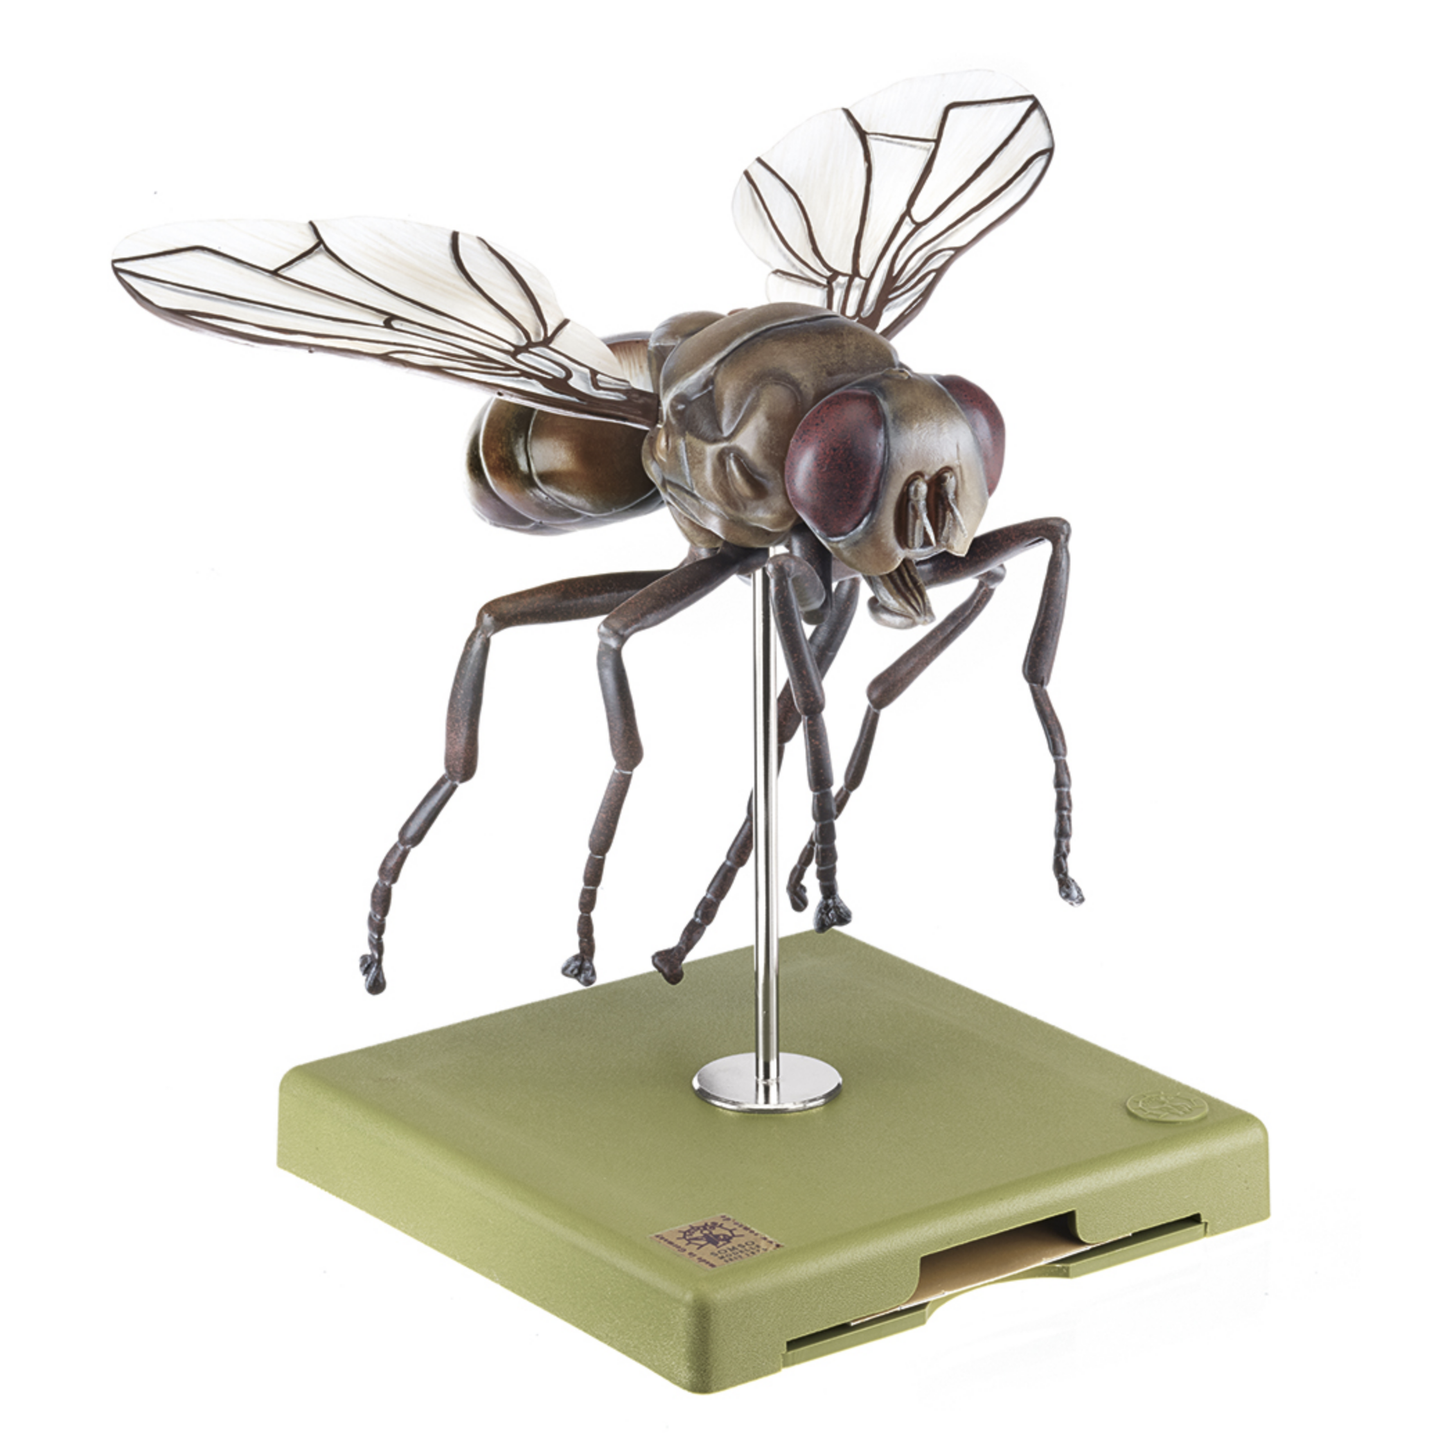 Model of a housefly (housefly, Musca domestica) in the highest quality and greatly enlarged